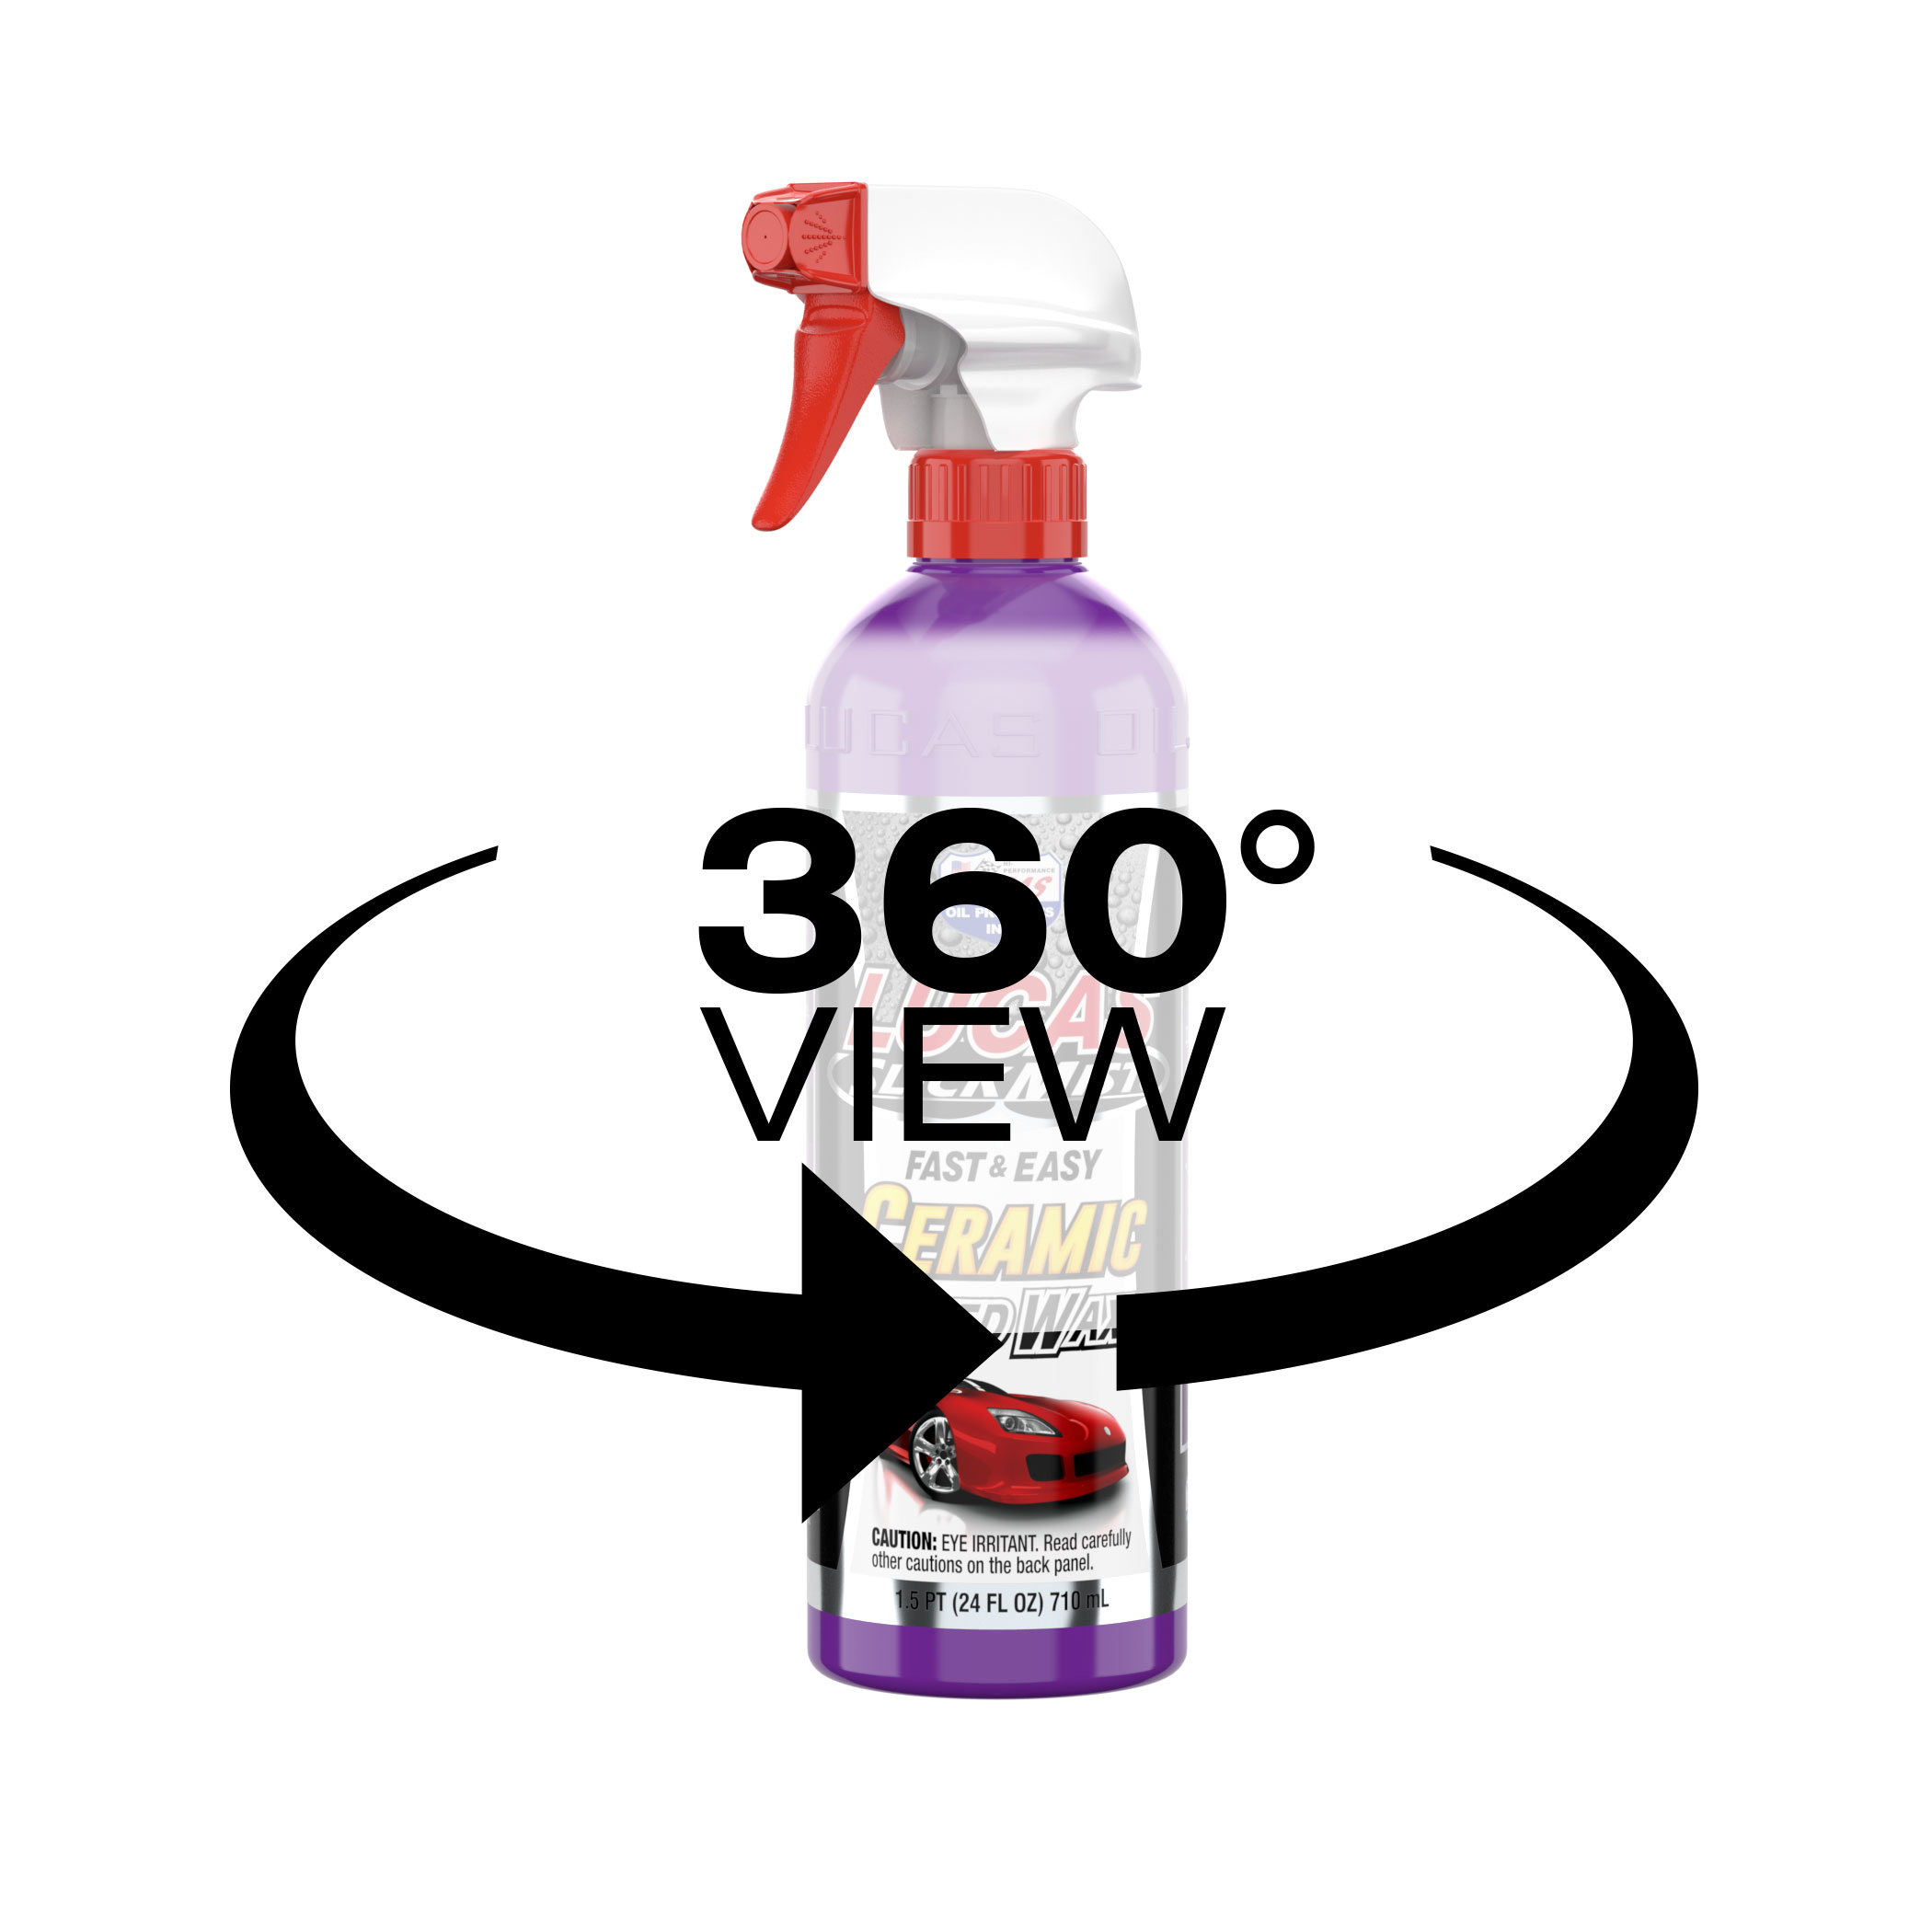 360 degree product view